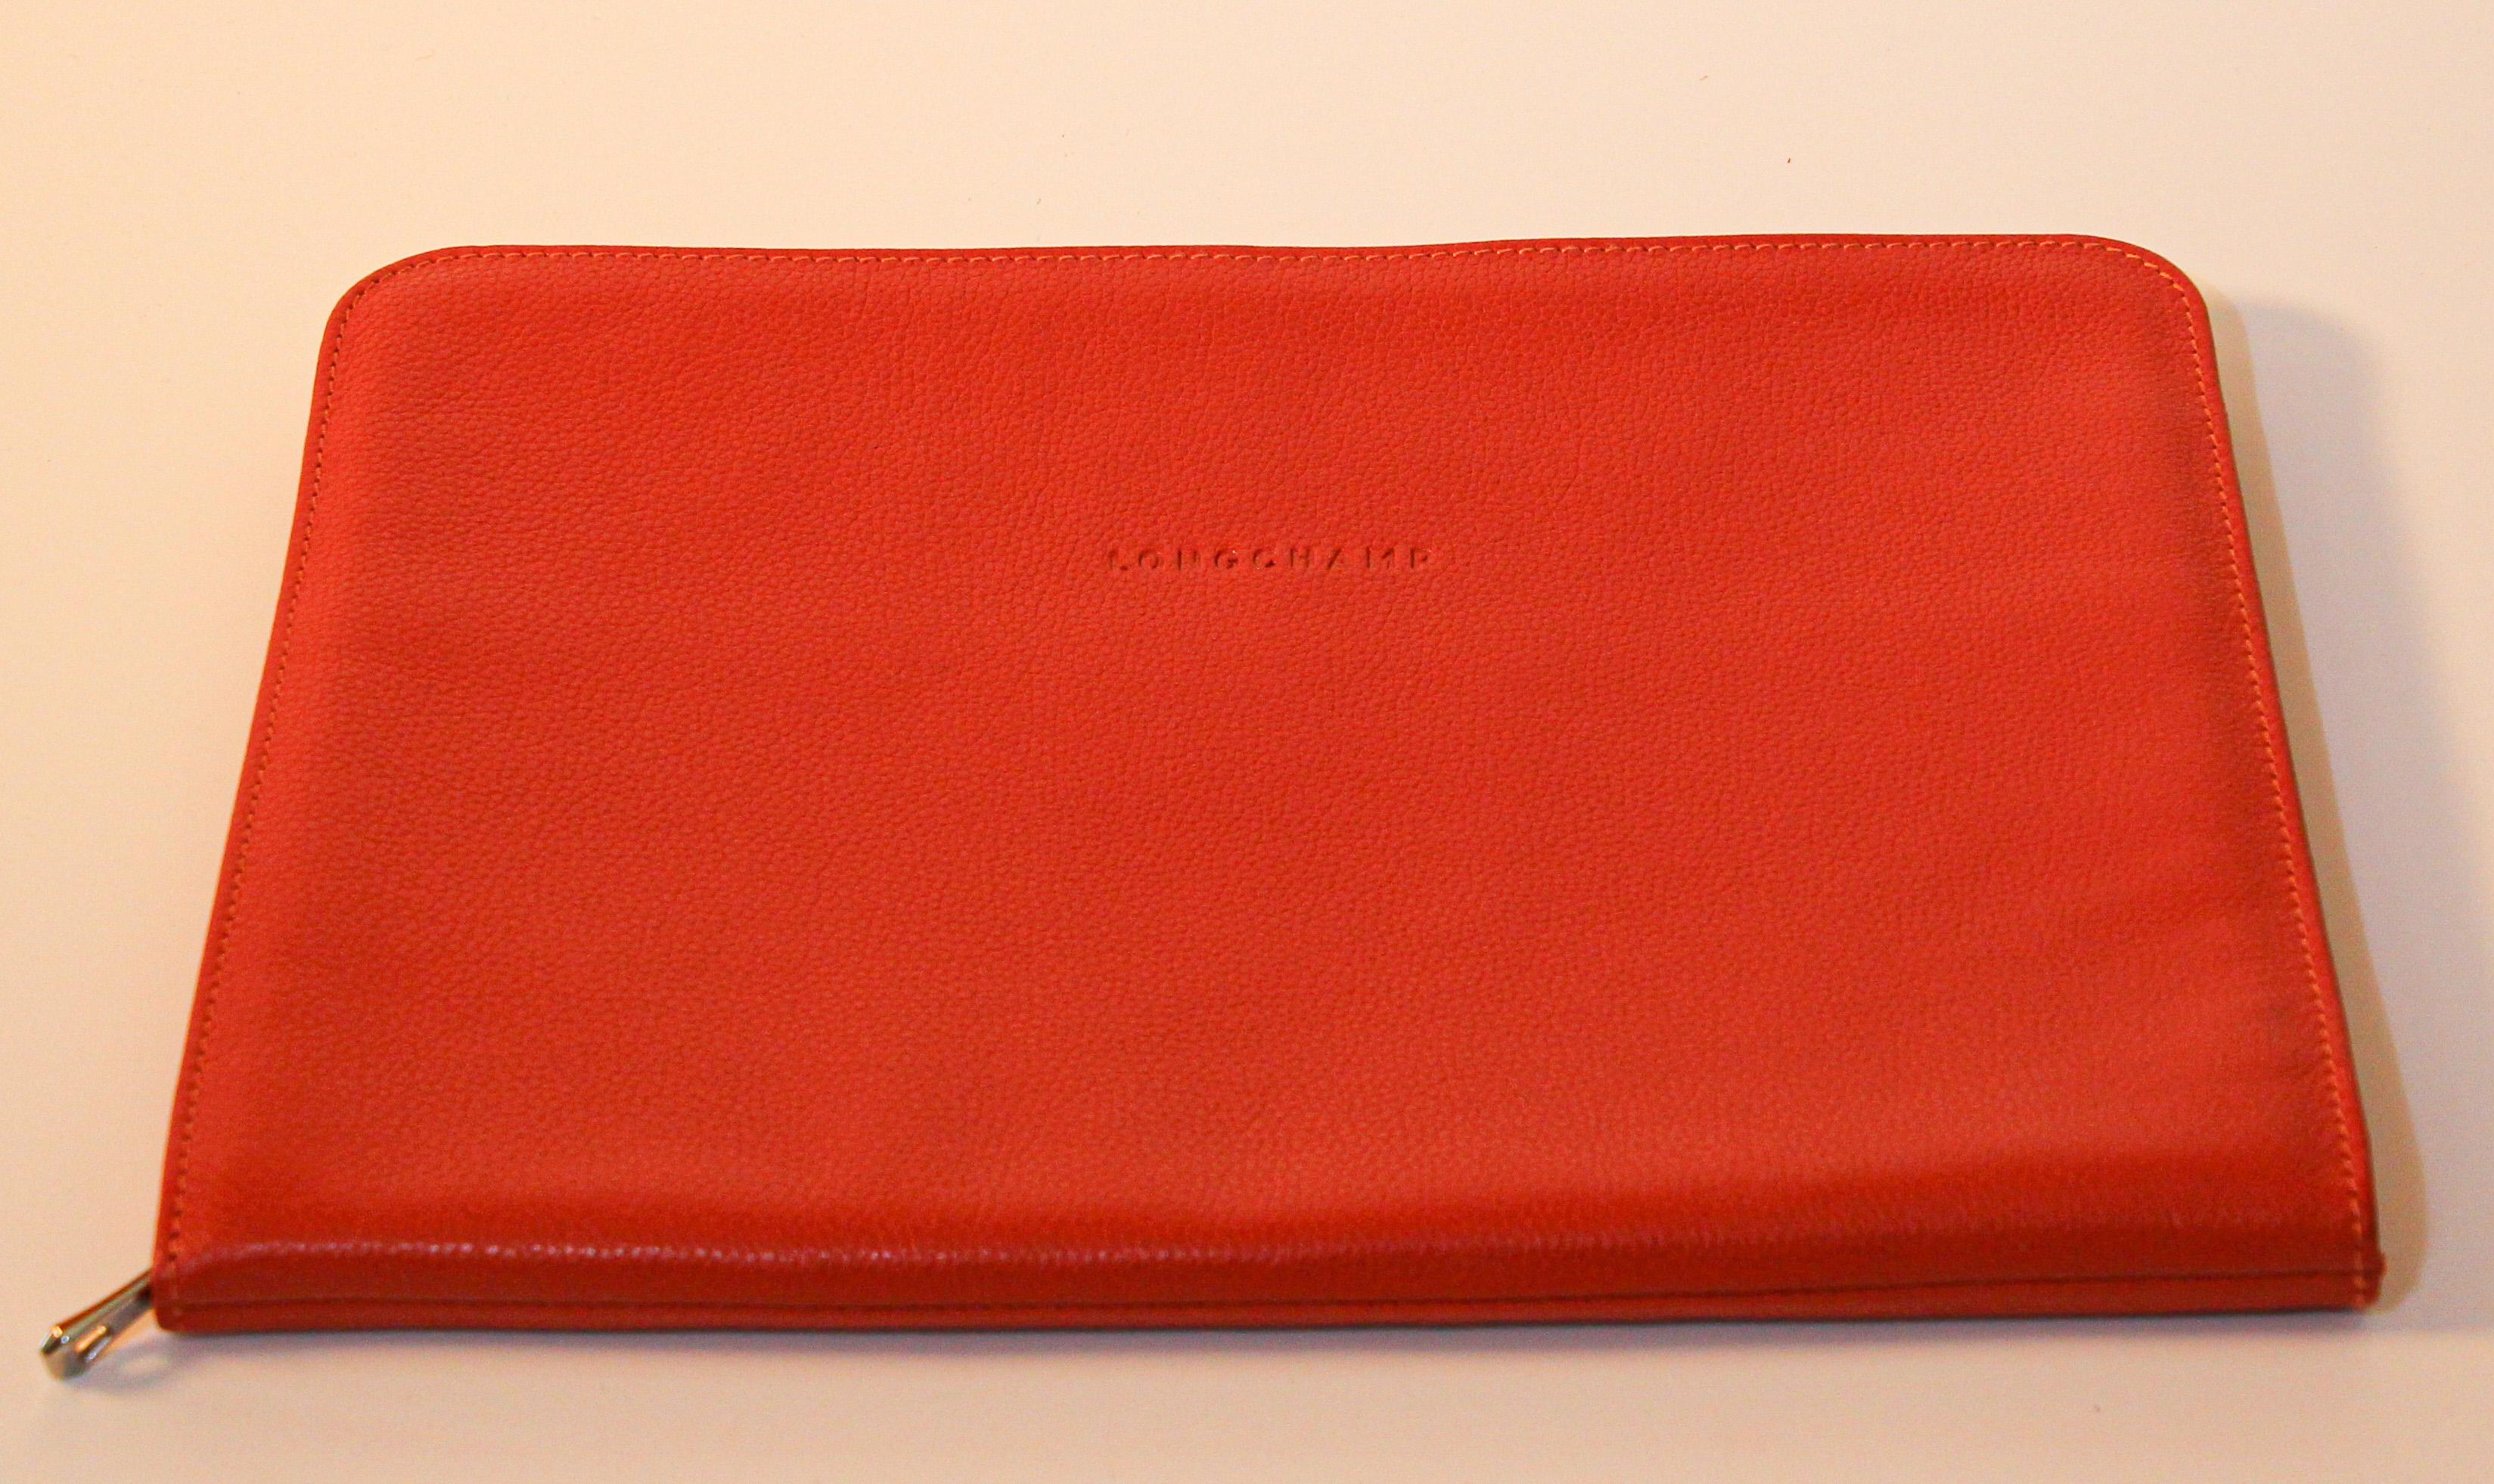 Longchamp leather burnt orange hand tooled leather computer case.
This elegant zipped case will both embellish and protect a 13-inch computer. 
